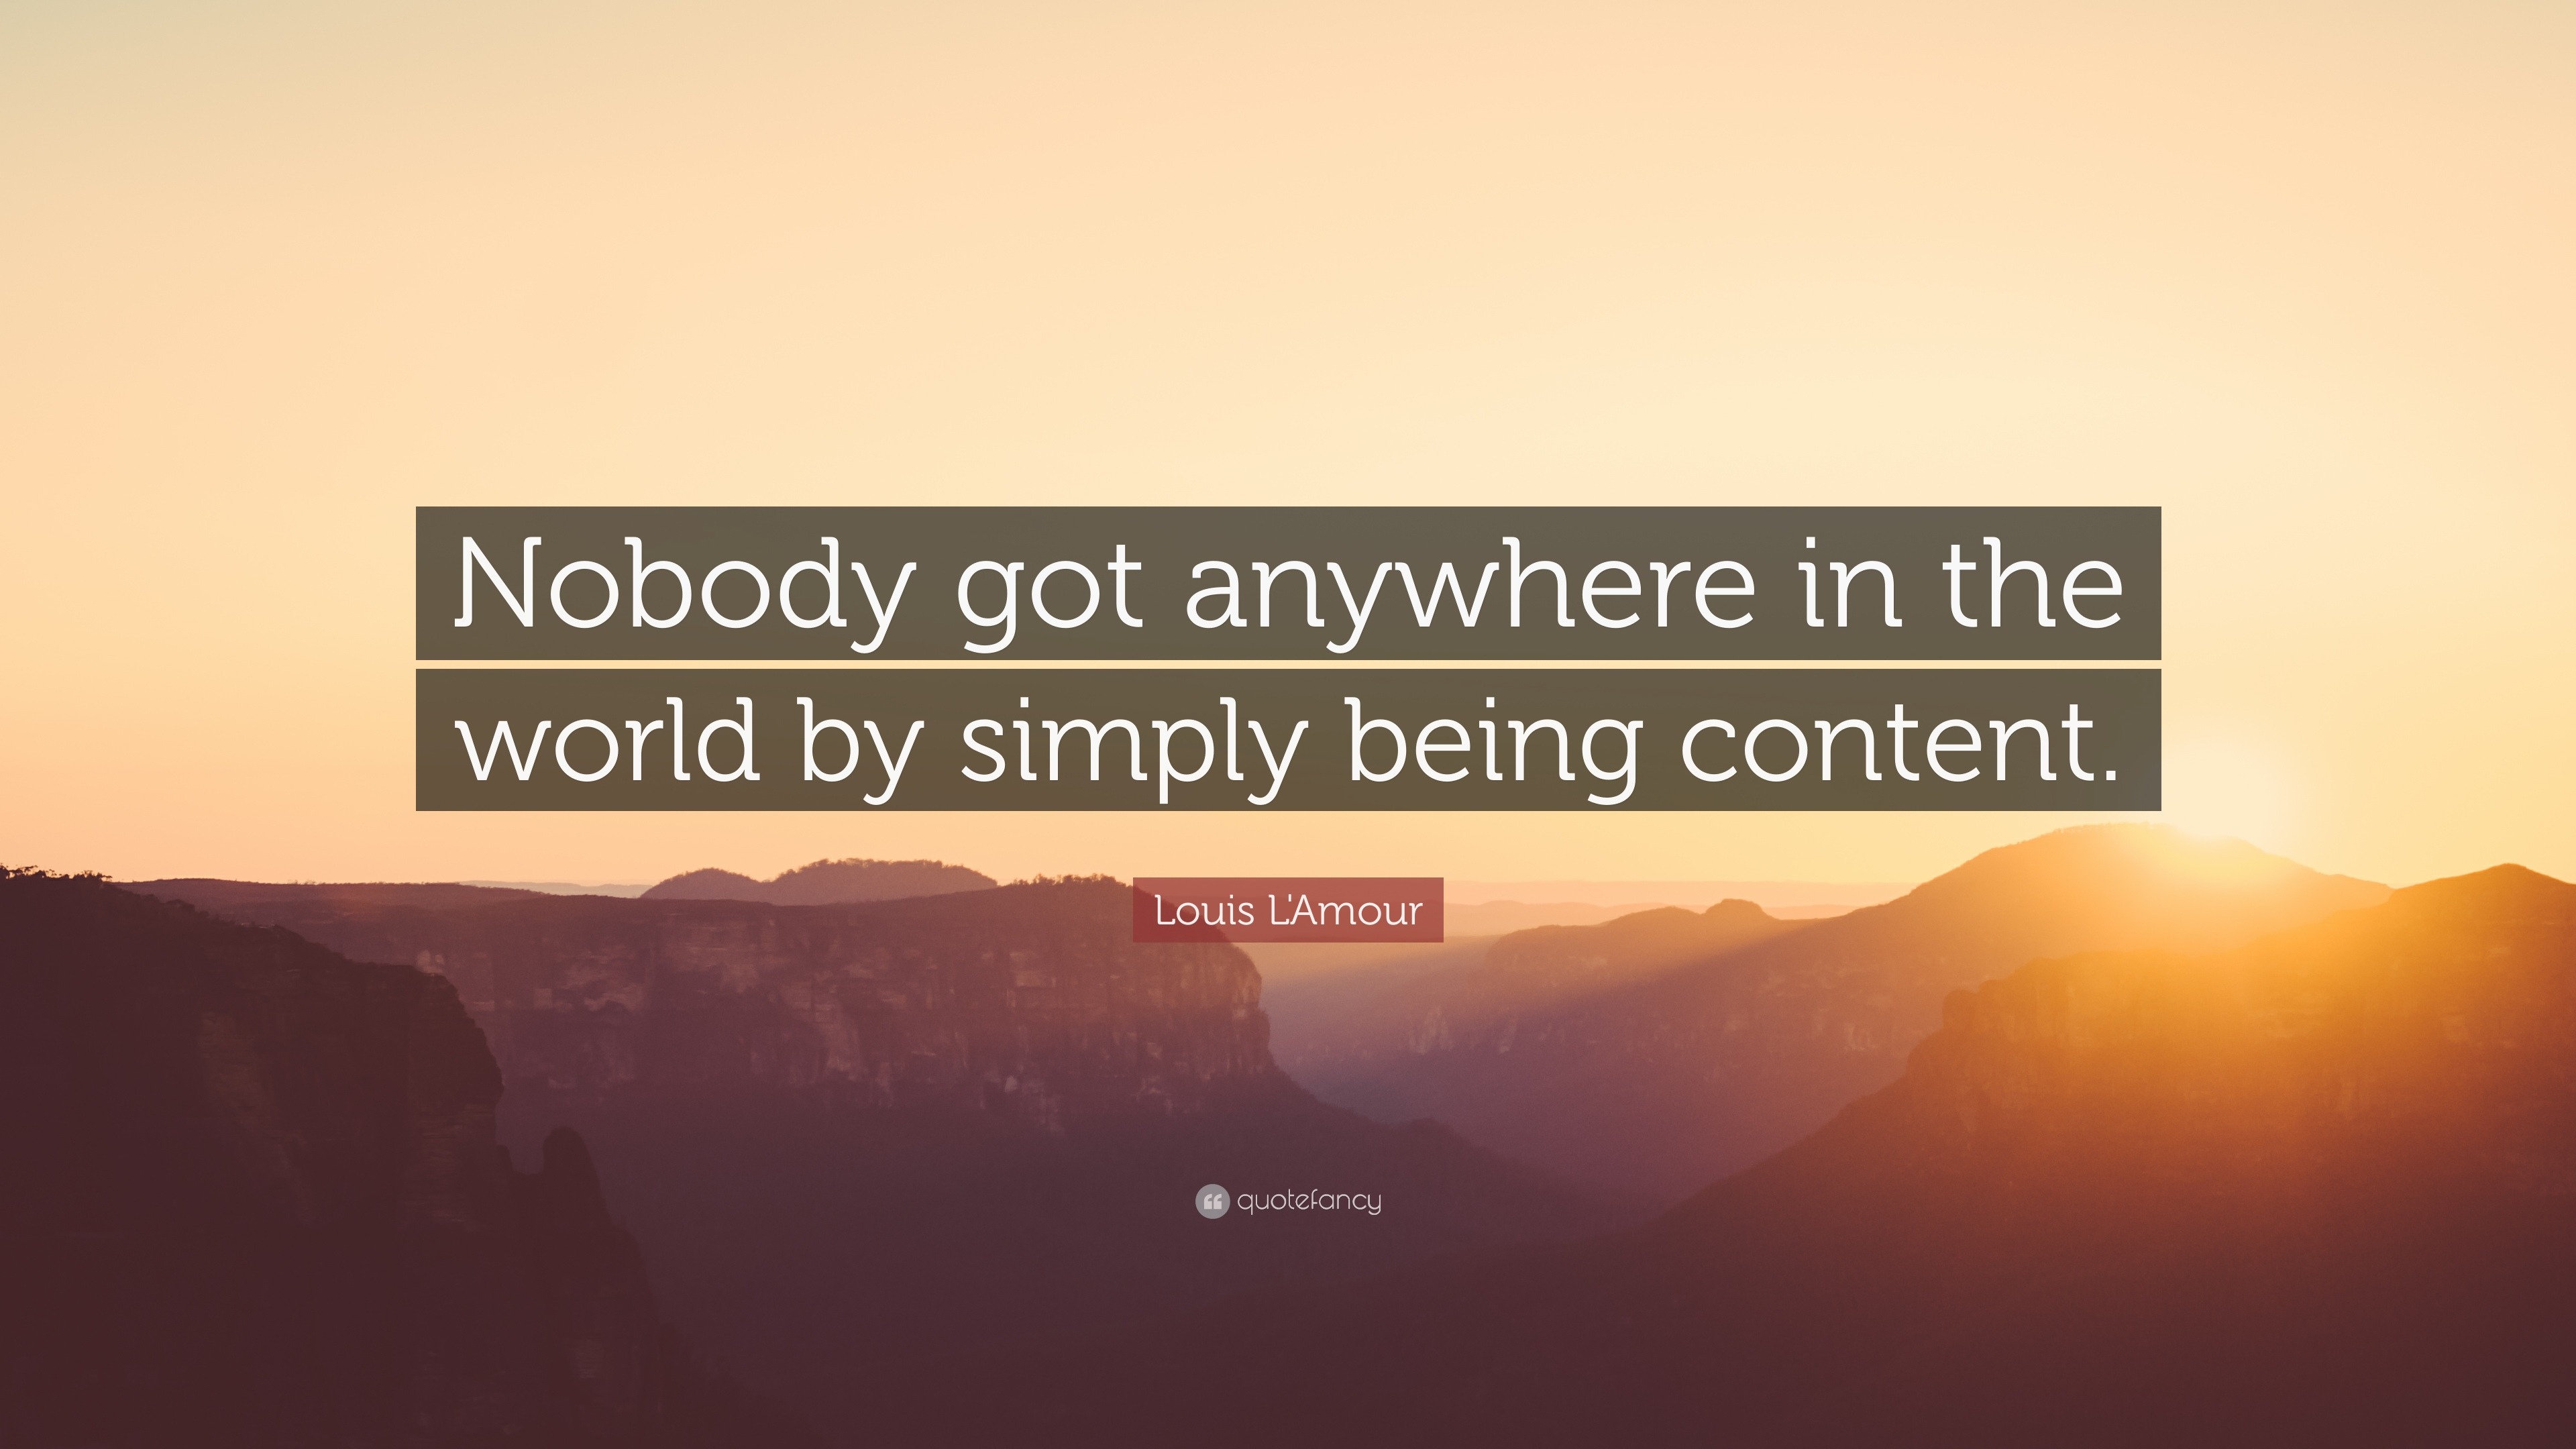 Louis L'Amour - Nobody got anywhere in the world by simply